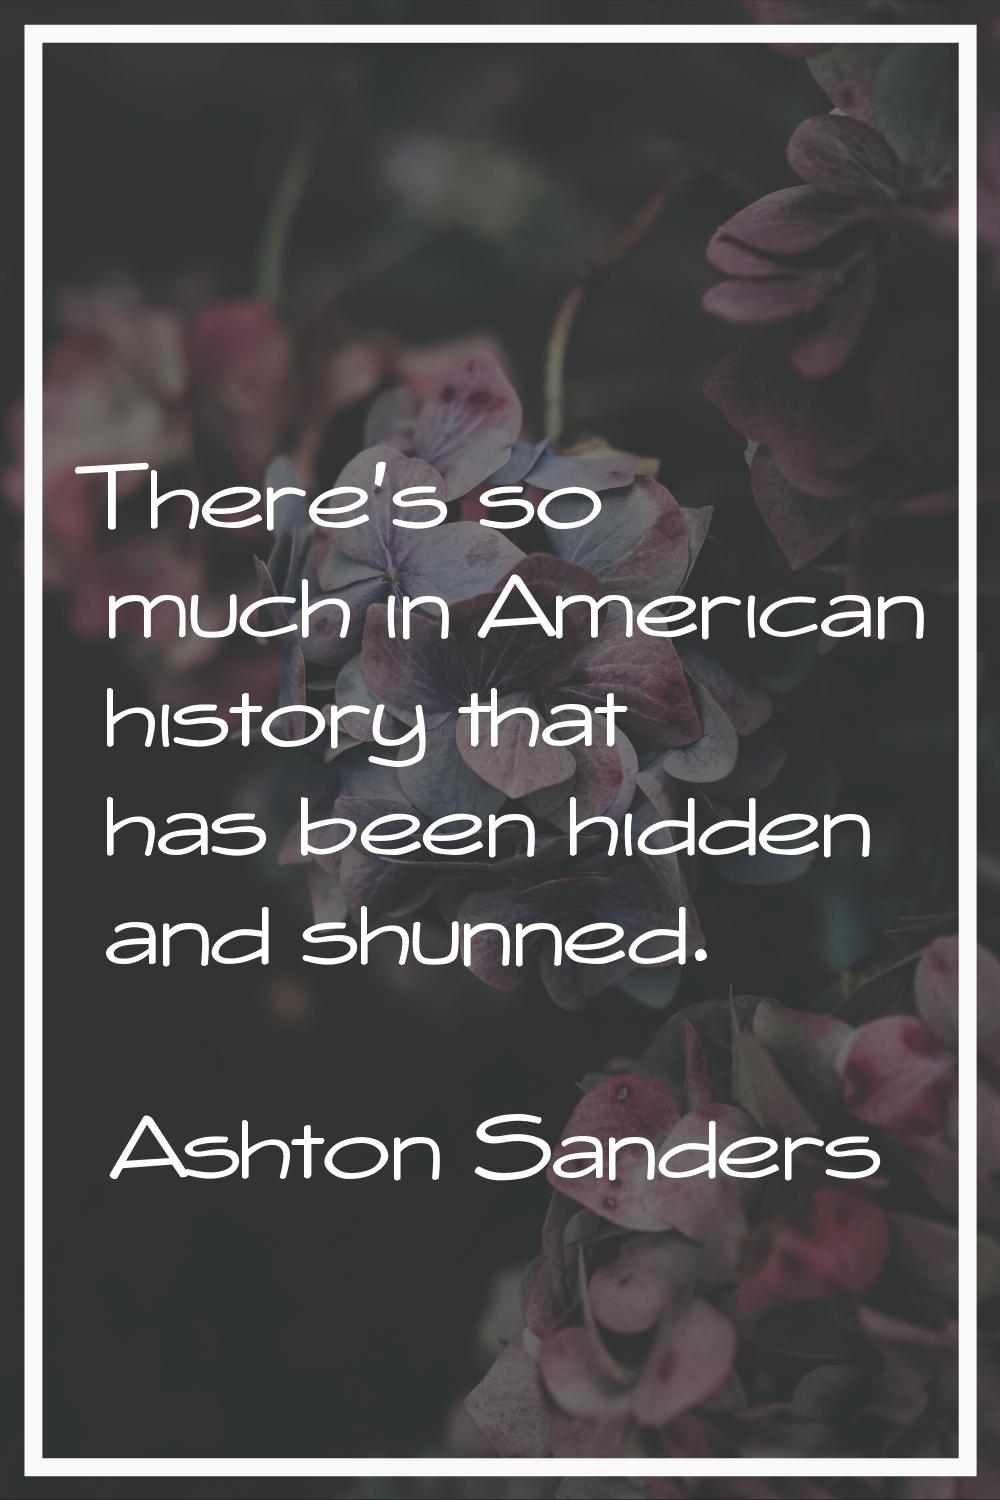 There's so much in American history that has been hidden and shunned.